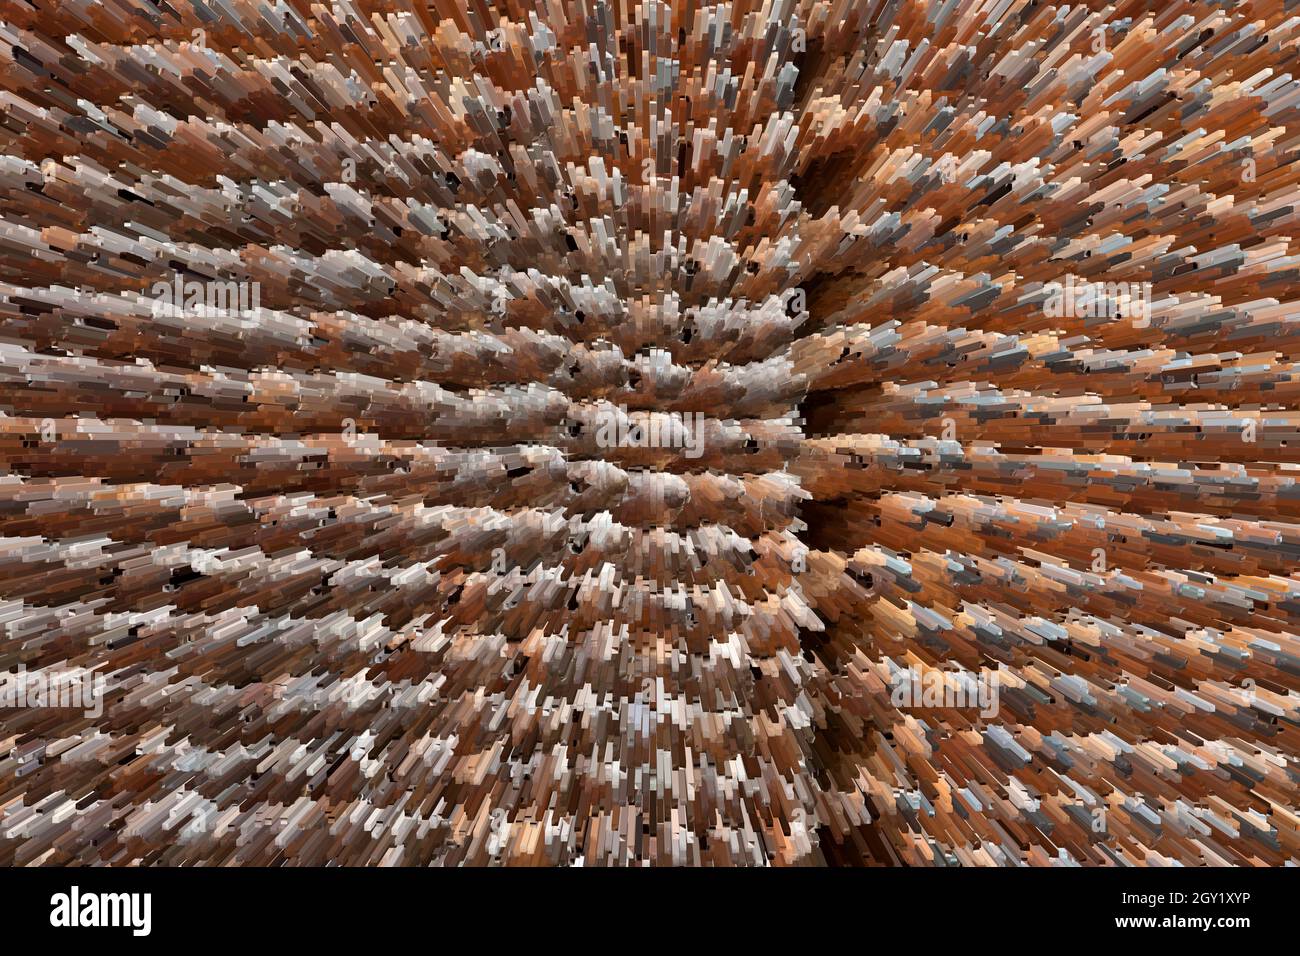 Abstracted view of stack of bobbins, Masson Mills, Derbyshire, England, UK Stock Photo